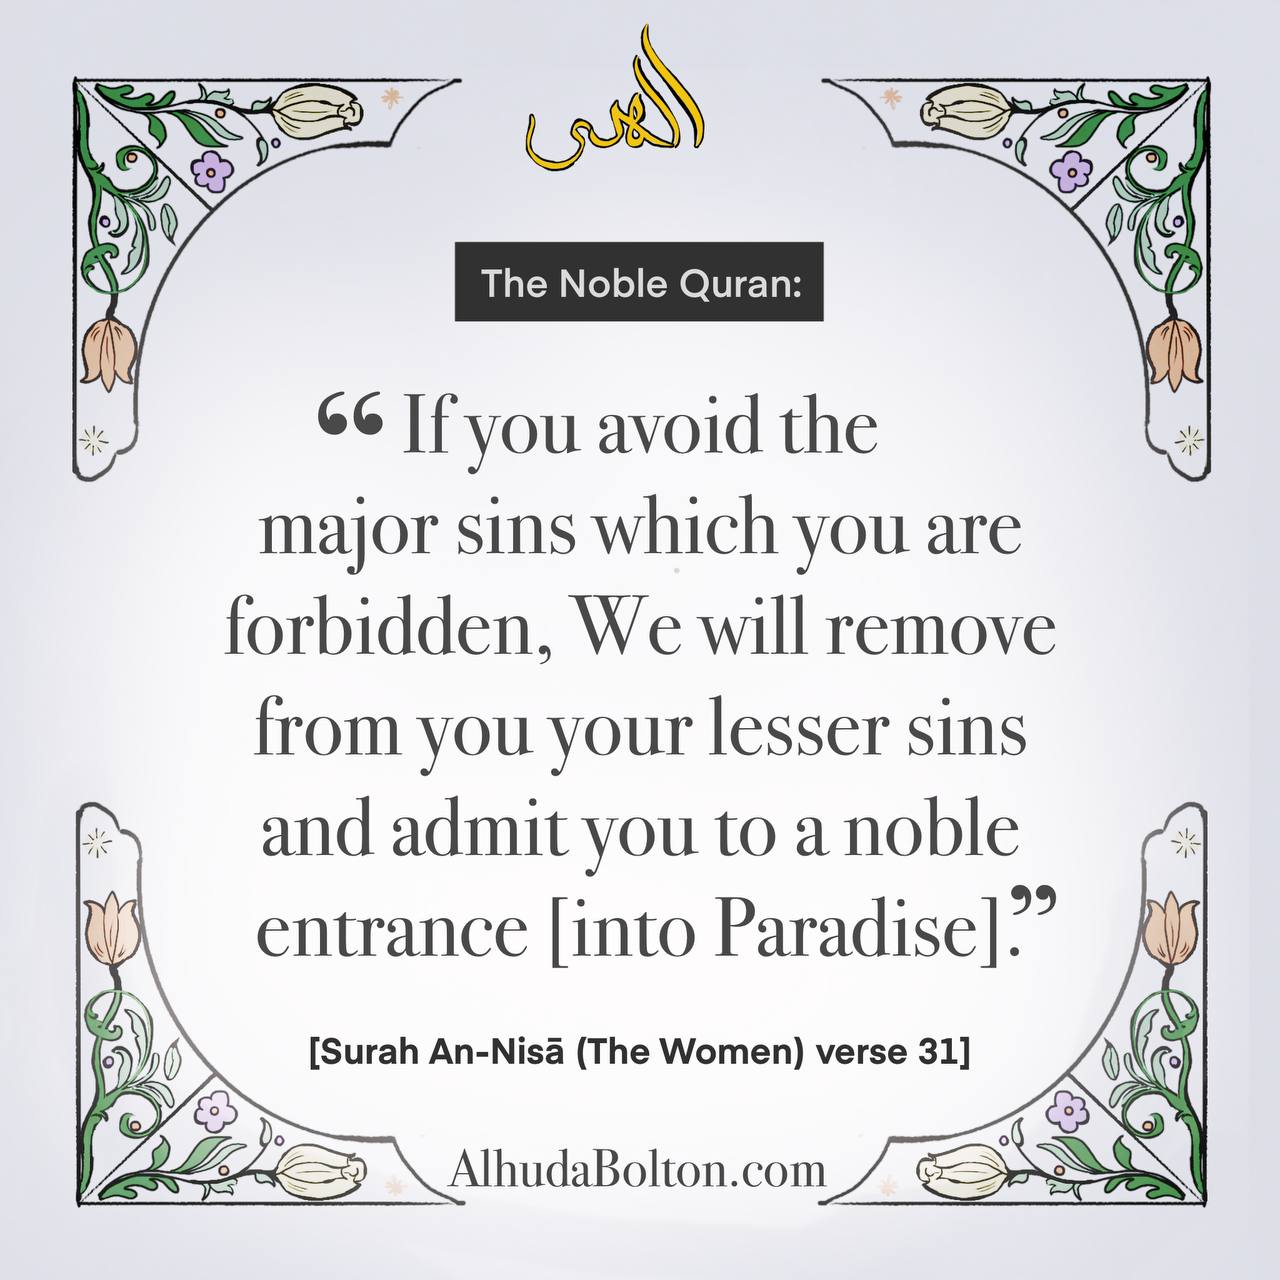 Quran: If you avoid the major sins…